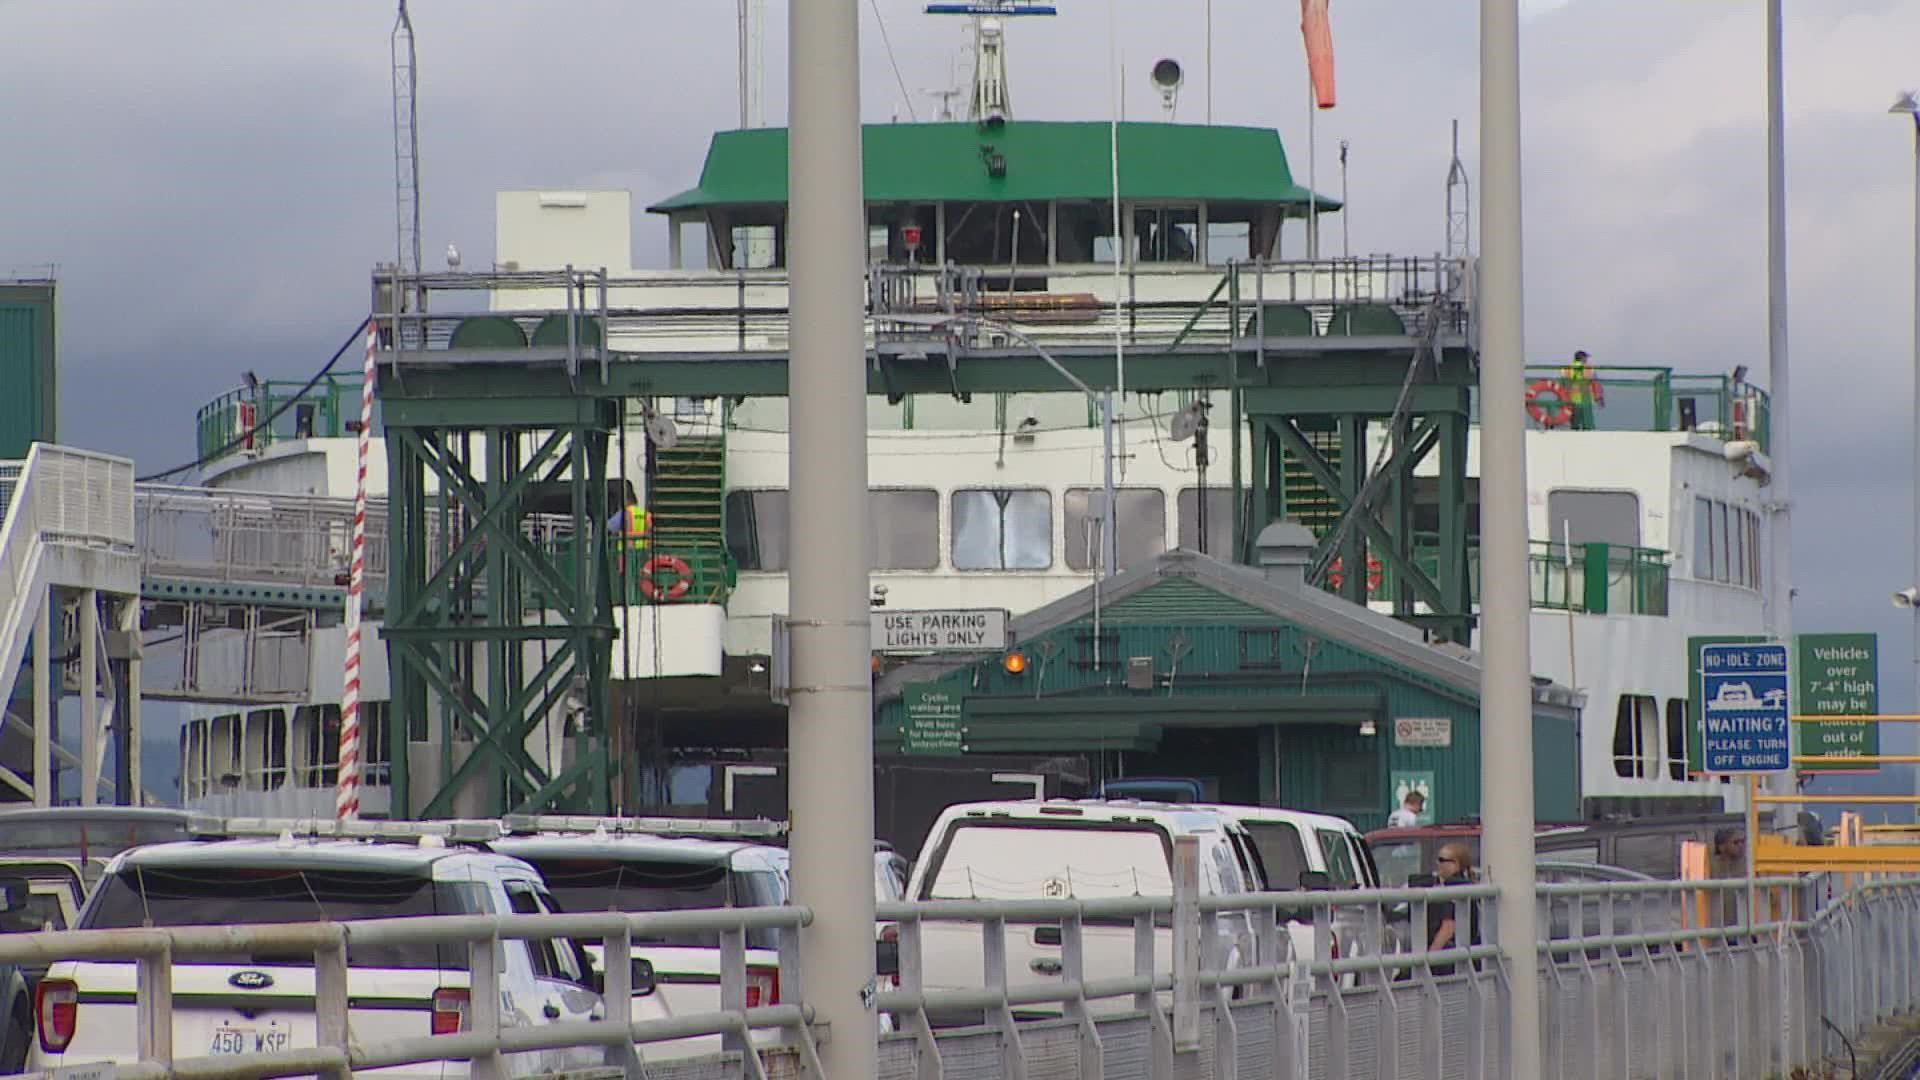 Officials said the Washington state ferry system will operate on a reduced schedule “until further notice” this summer due to crew shortages.